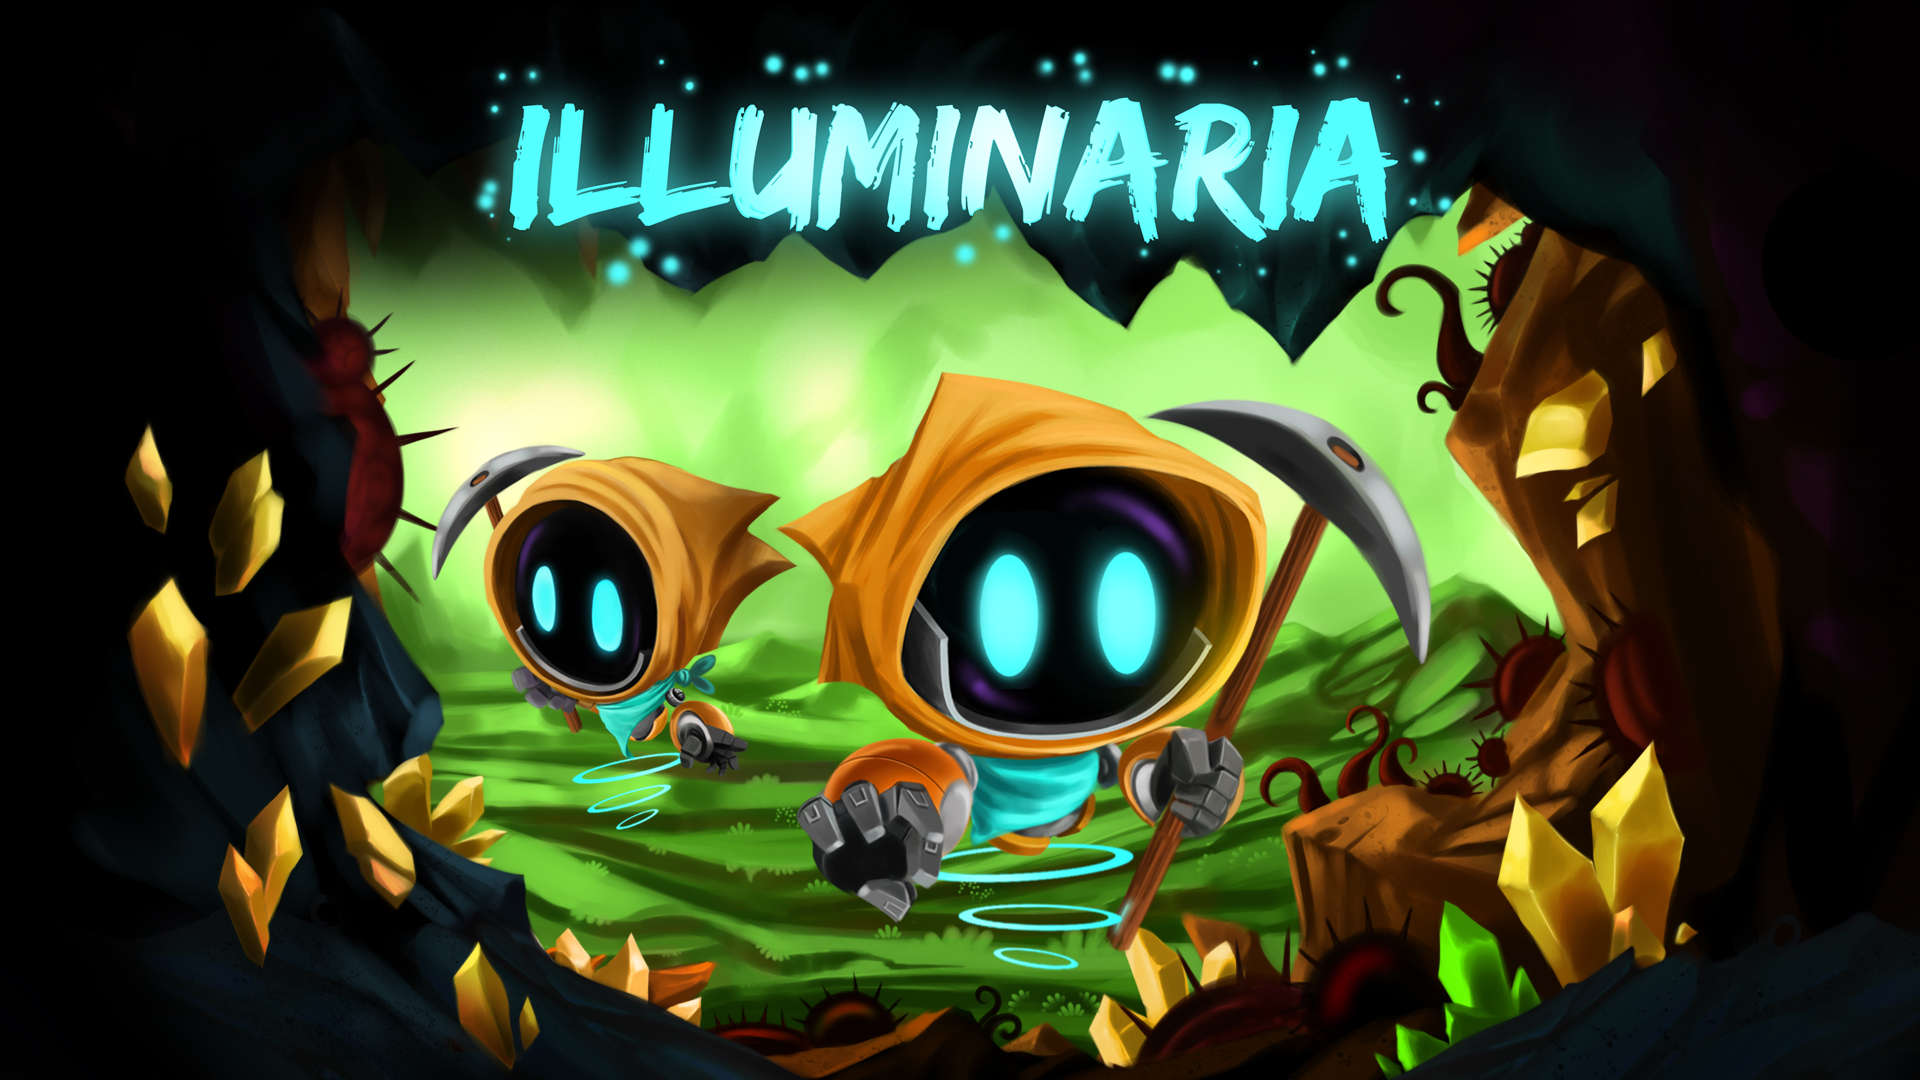 Illuminaria Provides a Fun Combination of Tower Defense and Resource Management